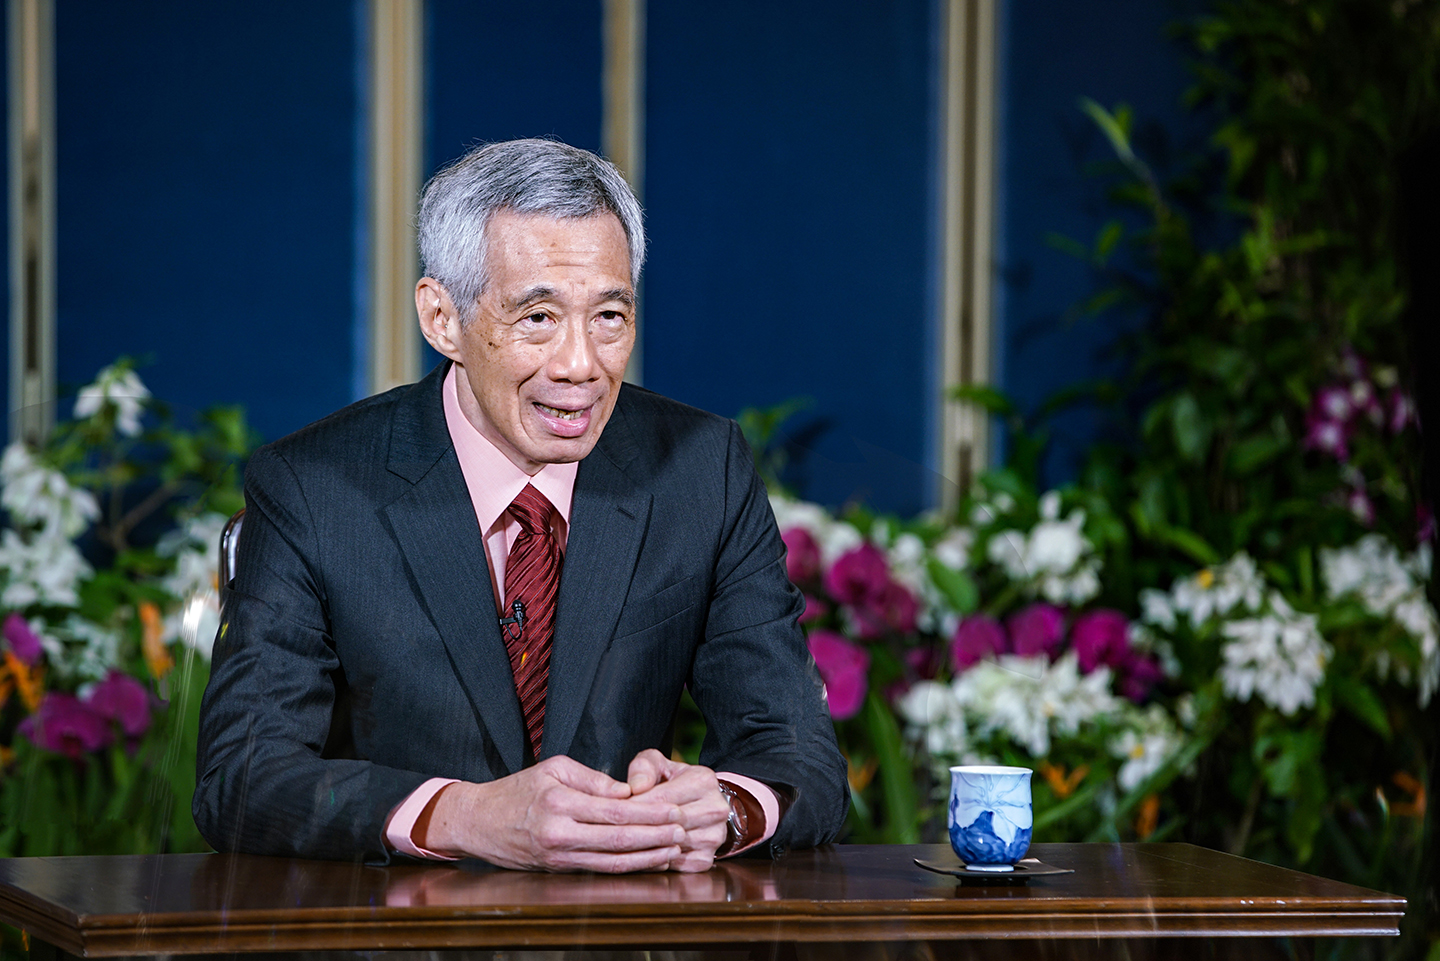 PM Lee Hsien Loong's message at the High-Level Meeting to commemorate the 75th anniversary of the UN on 21 September 2020 (MCI Photo)